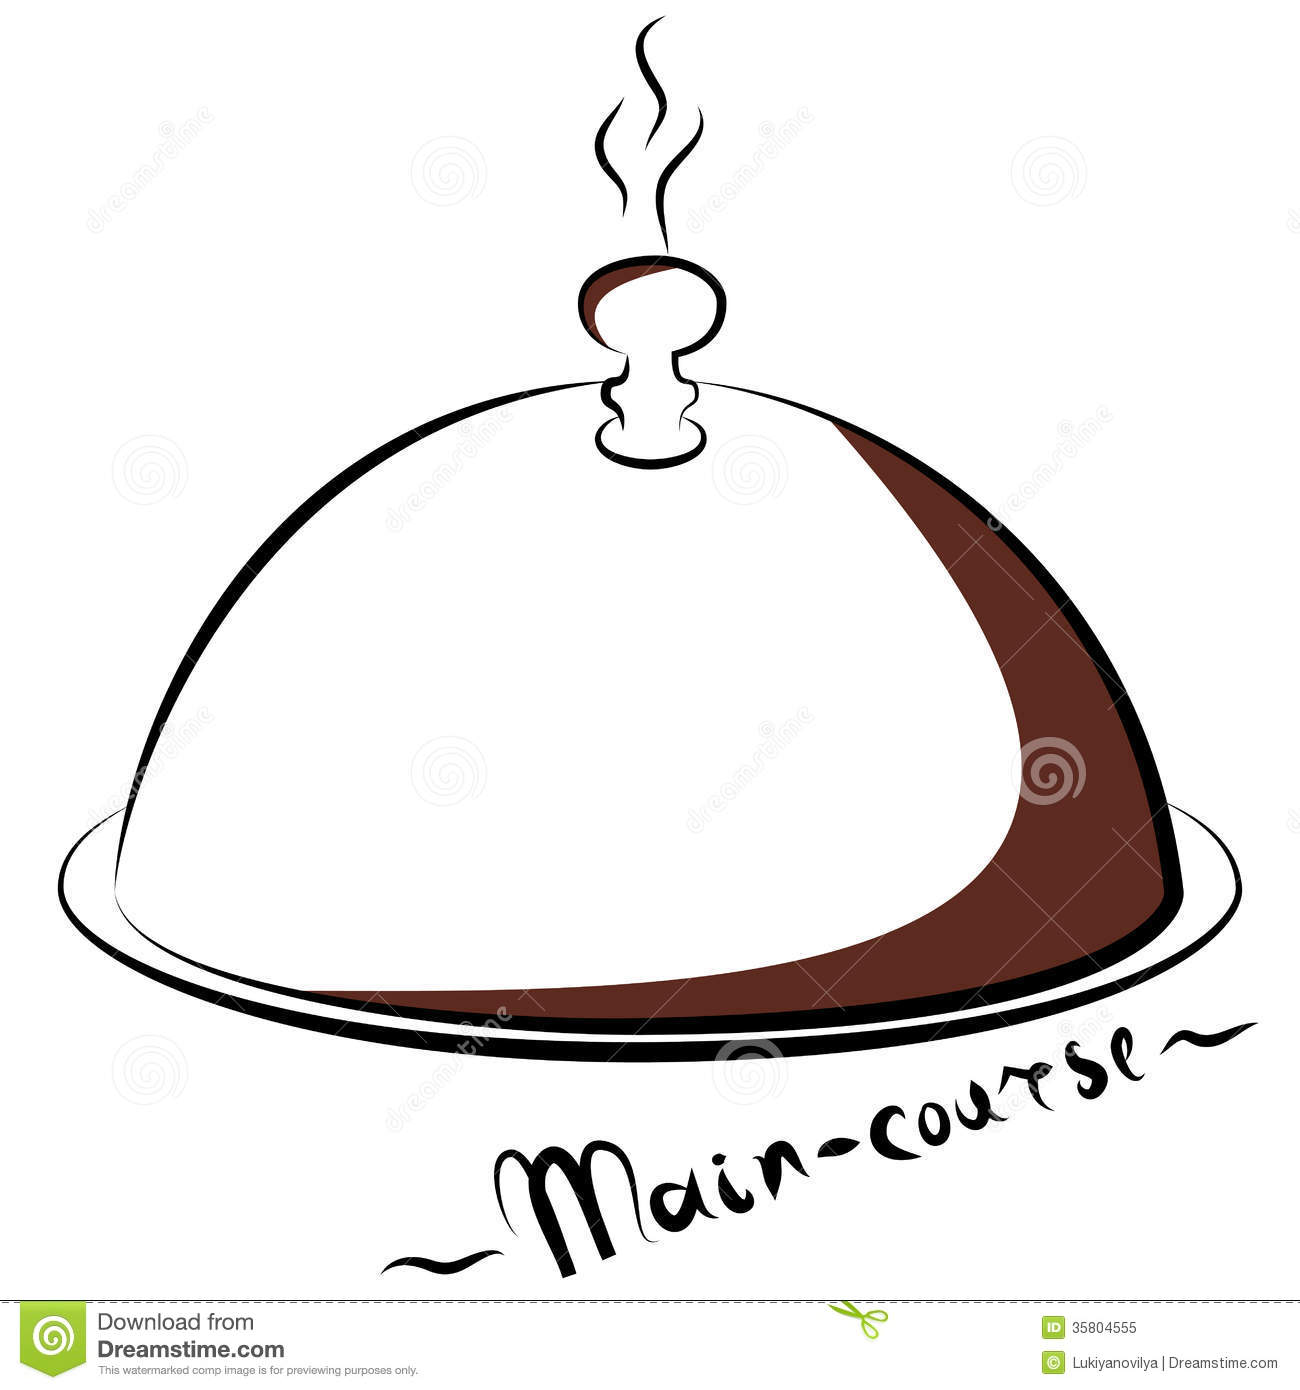 Main Course Dishes Clip Art